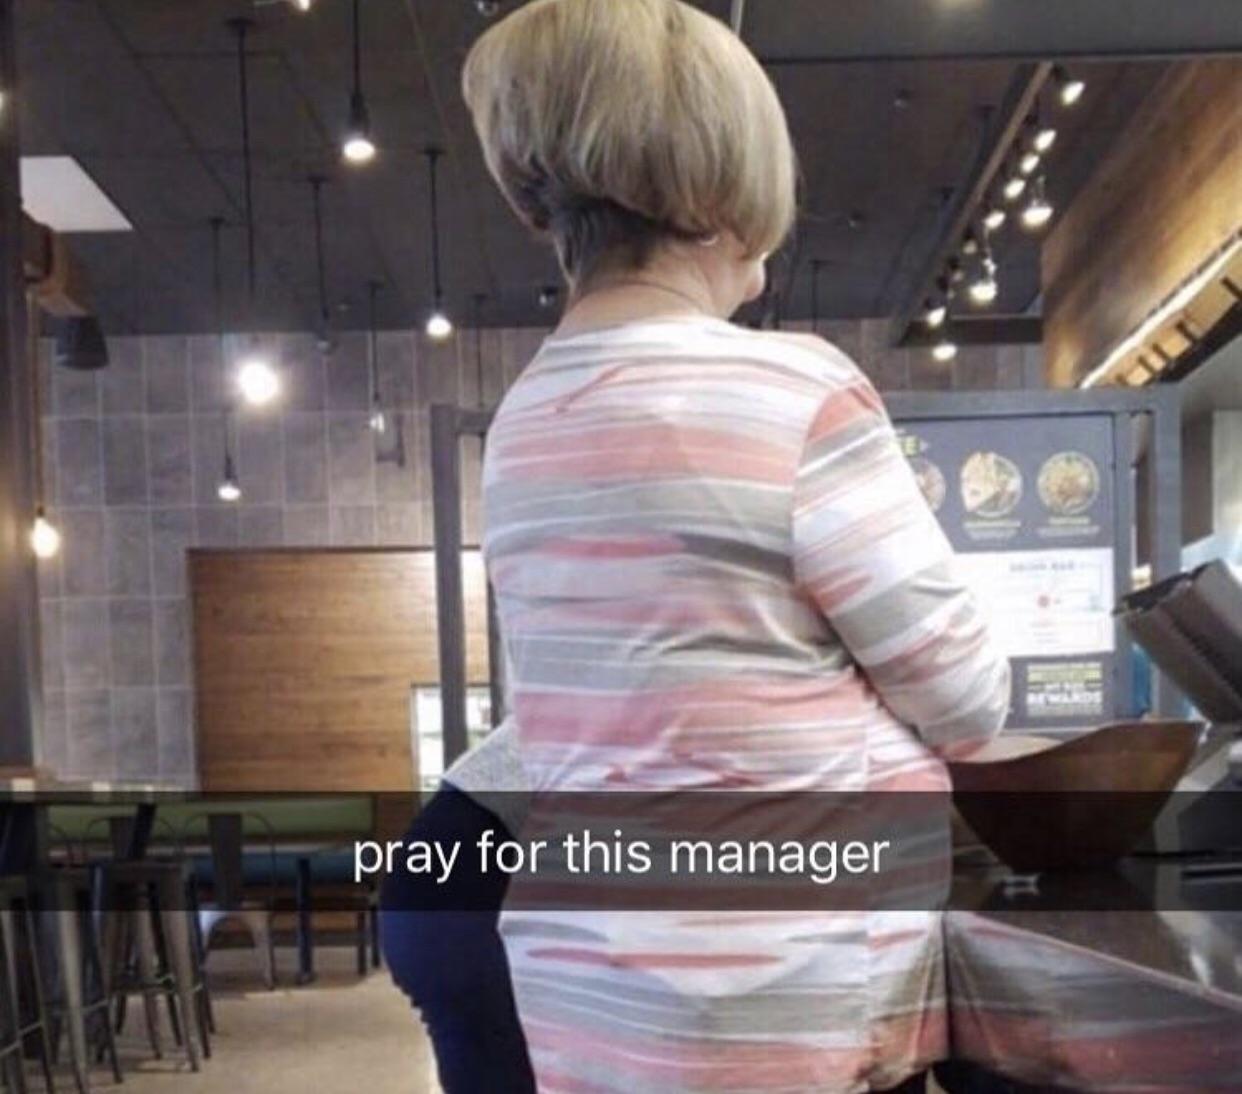 speak to manager meme - pray for this manager